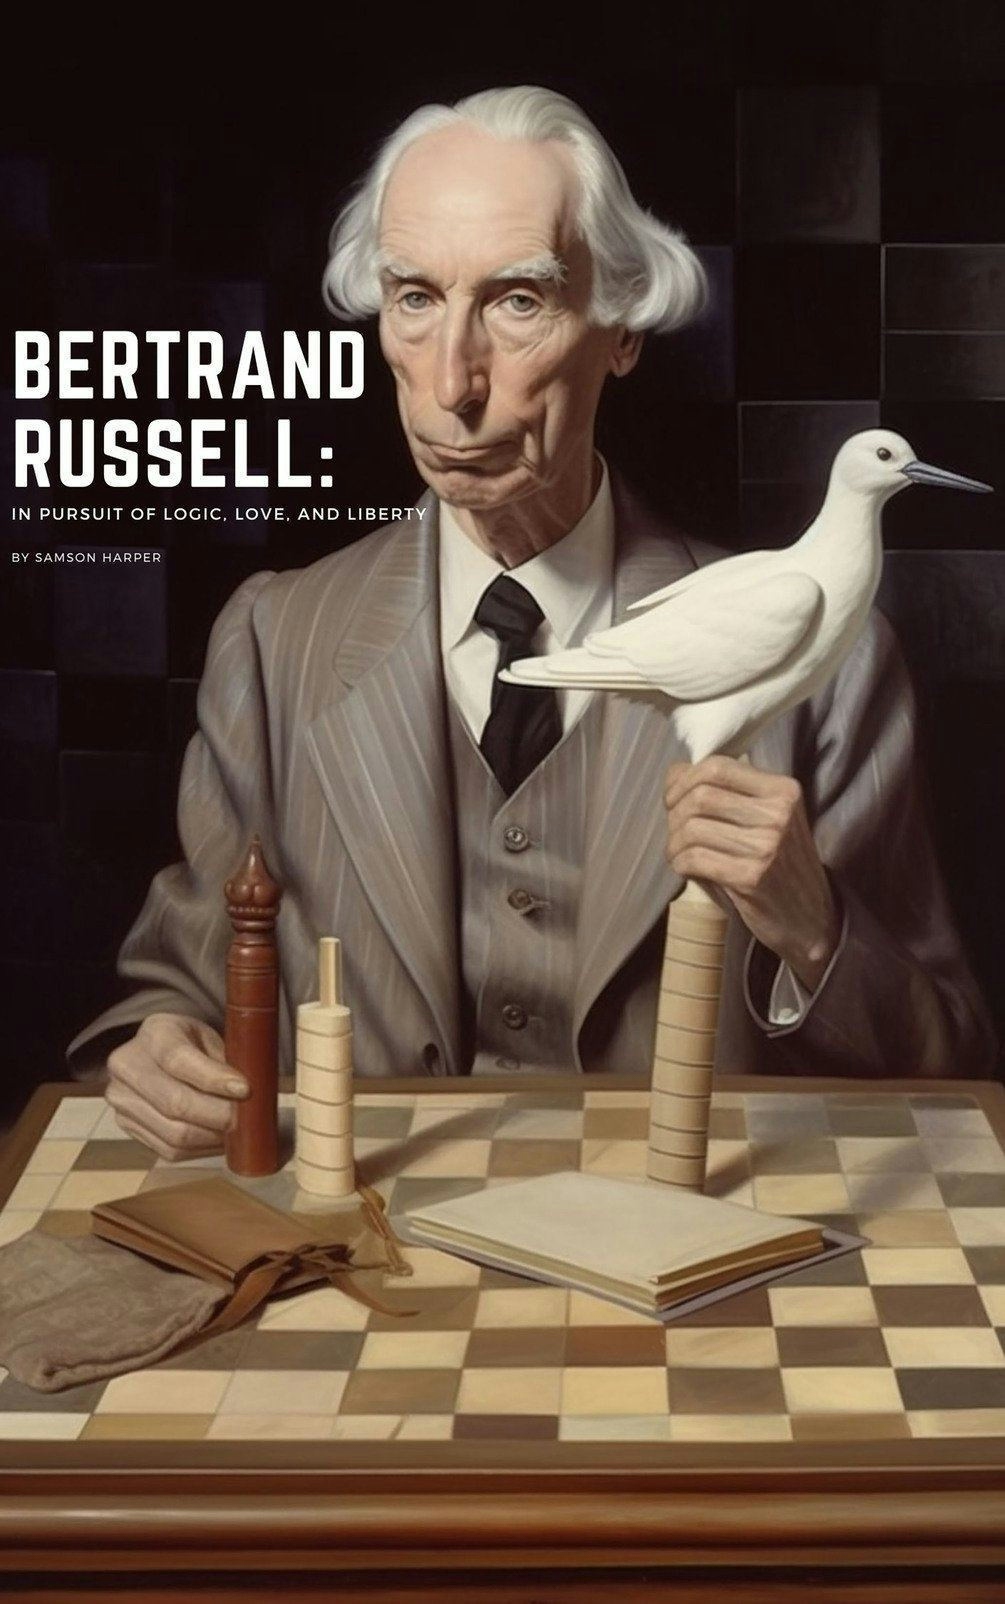 Bertrand Russell: In Pursuit of Logic, Love, and Liberty - Book Overview